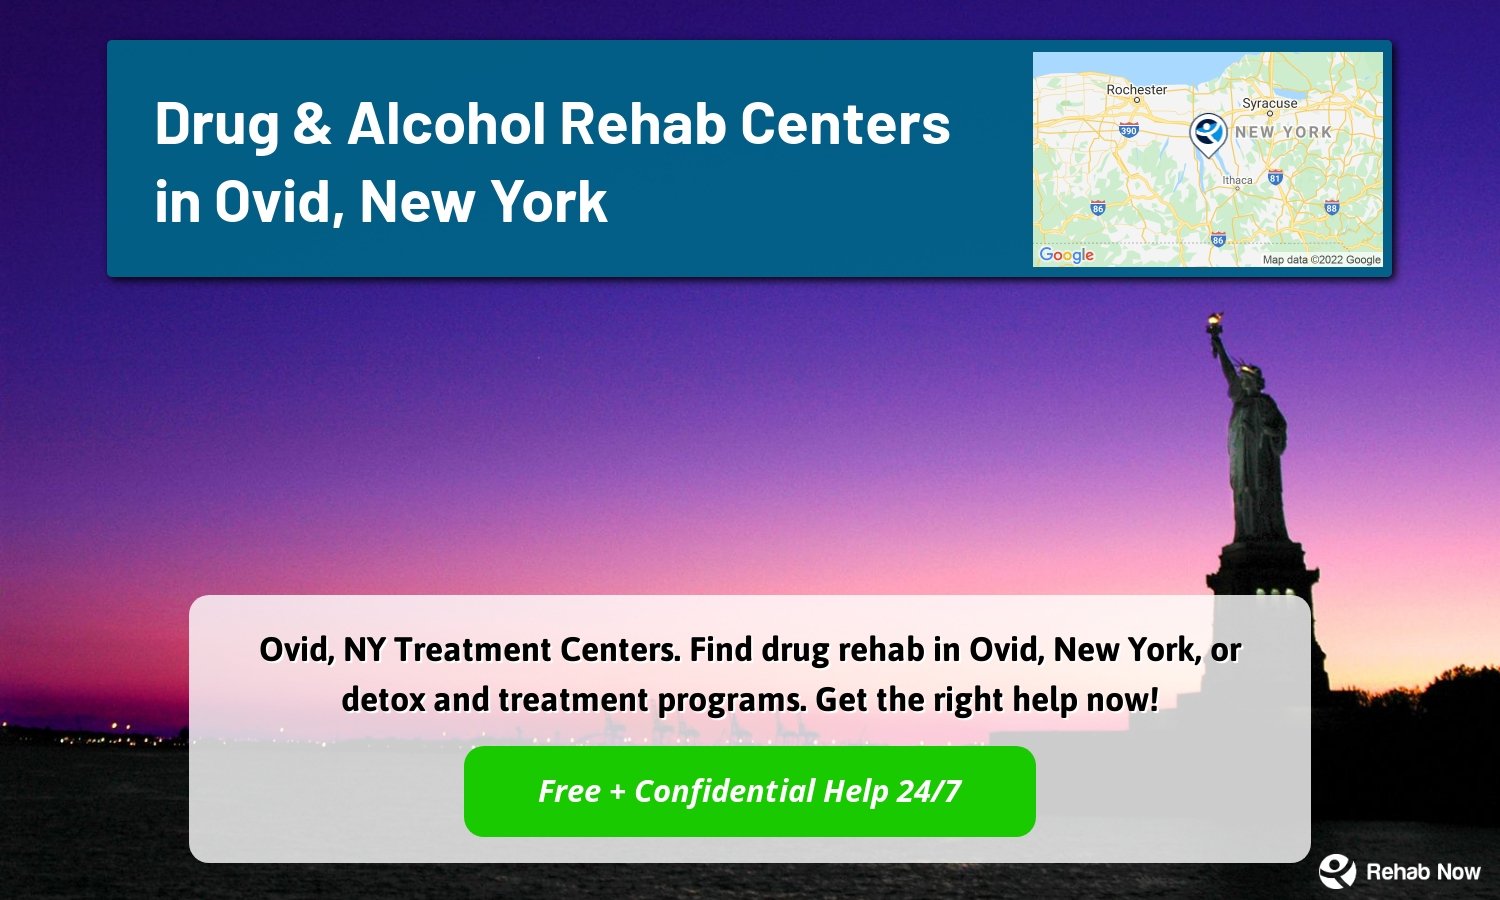 Ovid, NY Treatment Centers. Find drug rehab in Ovid, New York, or detox and treatment programs. Get the right help now!